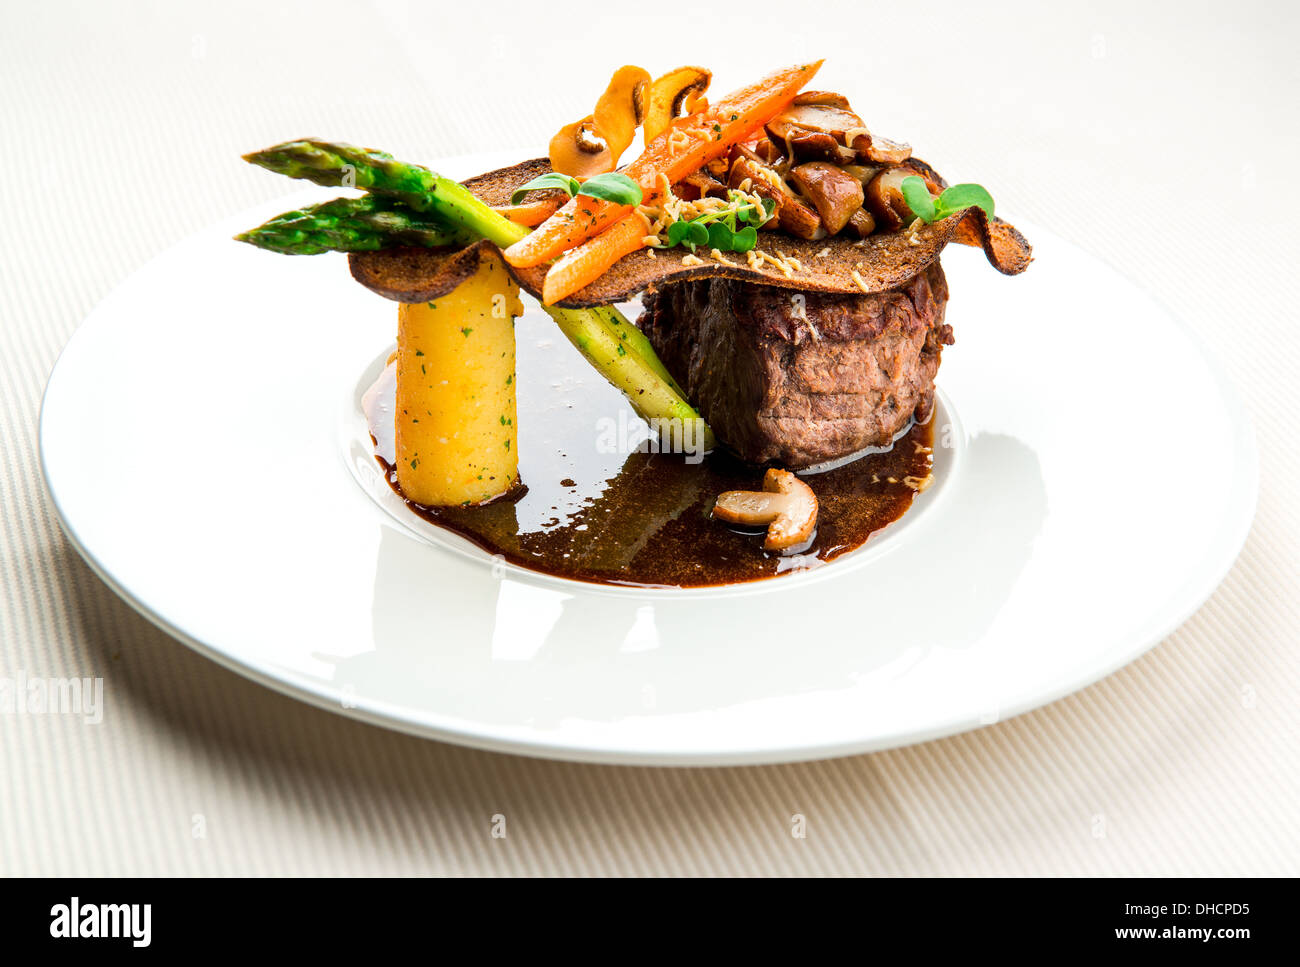 Fillet mignon with vegetables Stock Photo